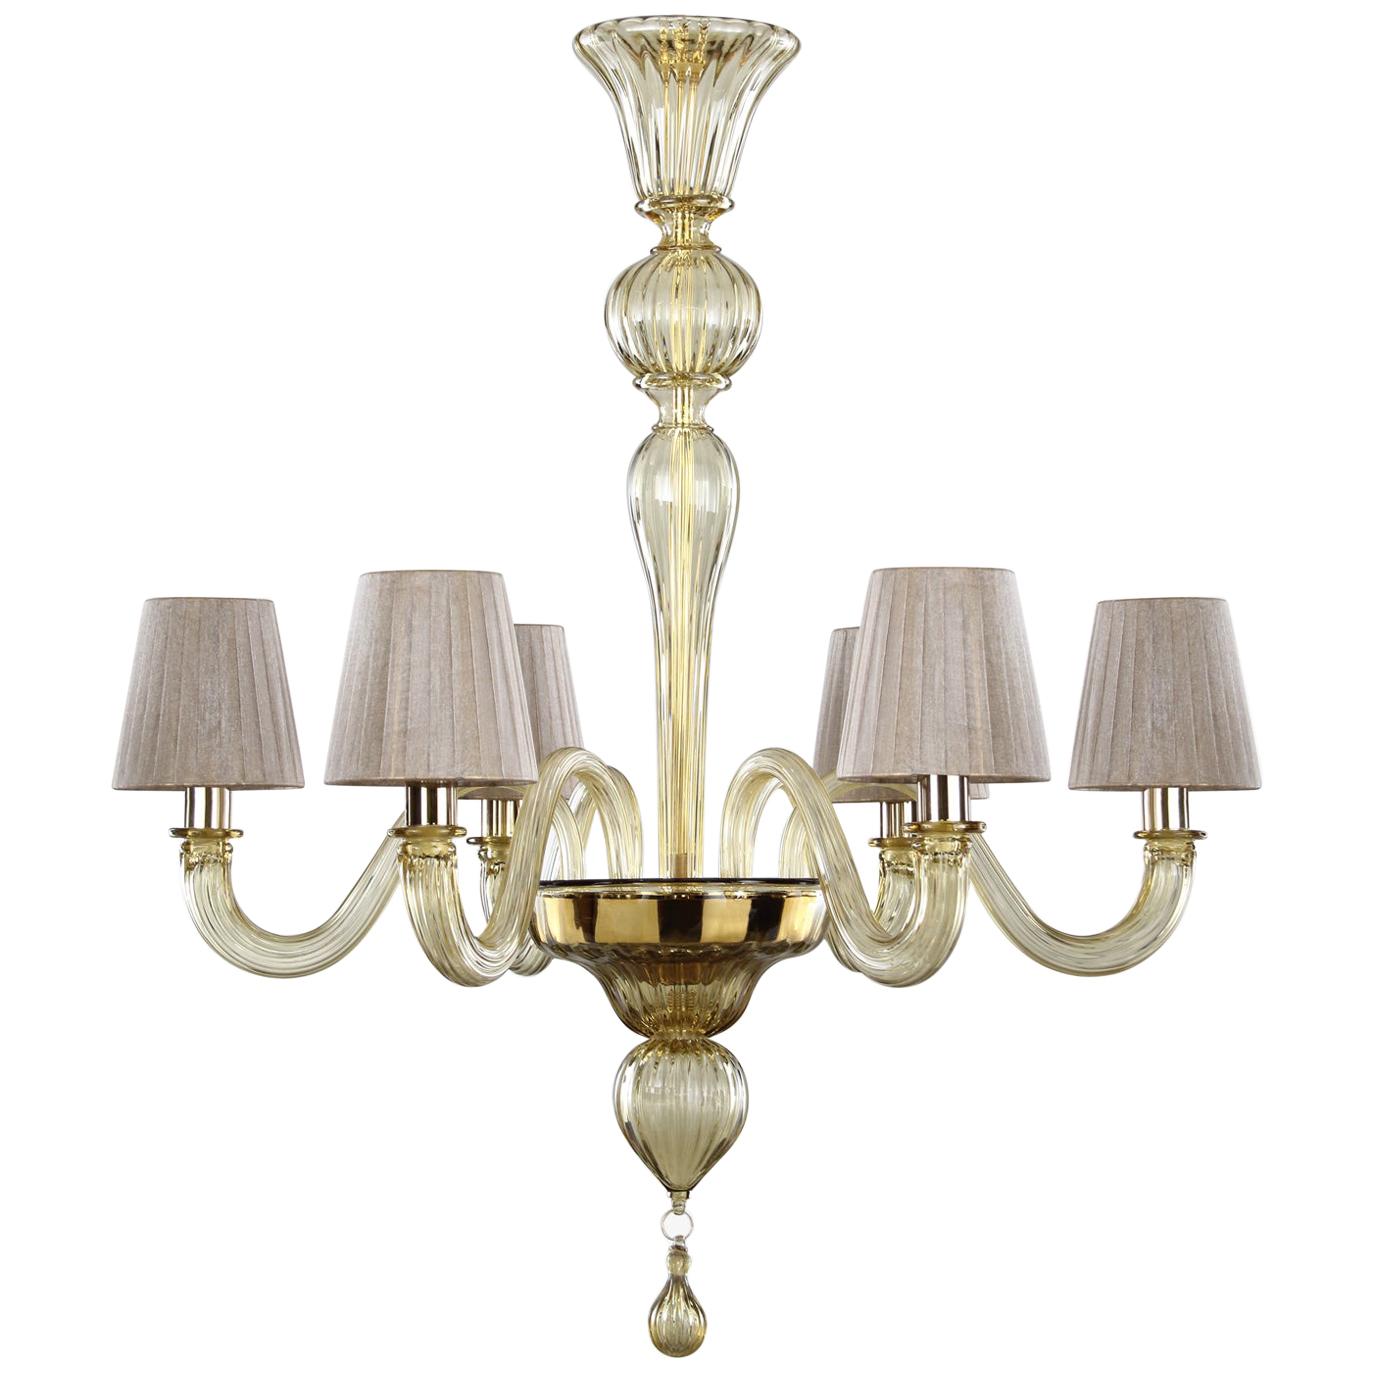 Chandelier 6 Arms Smoky Quartz Murano Glass, Lampshades Chapeau by Multiforme